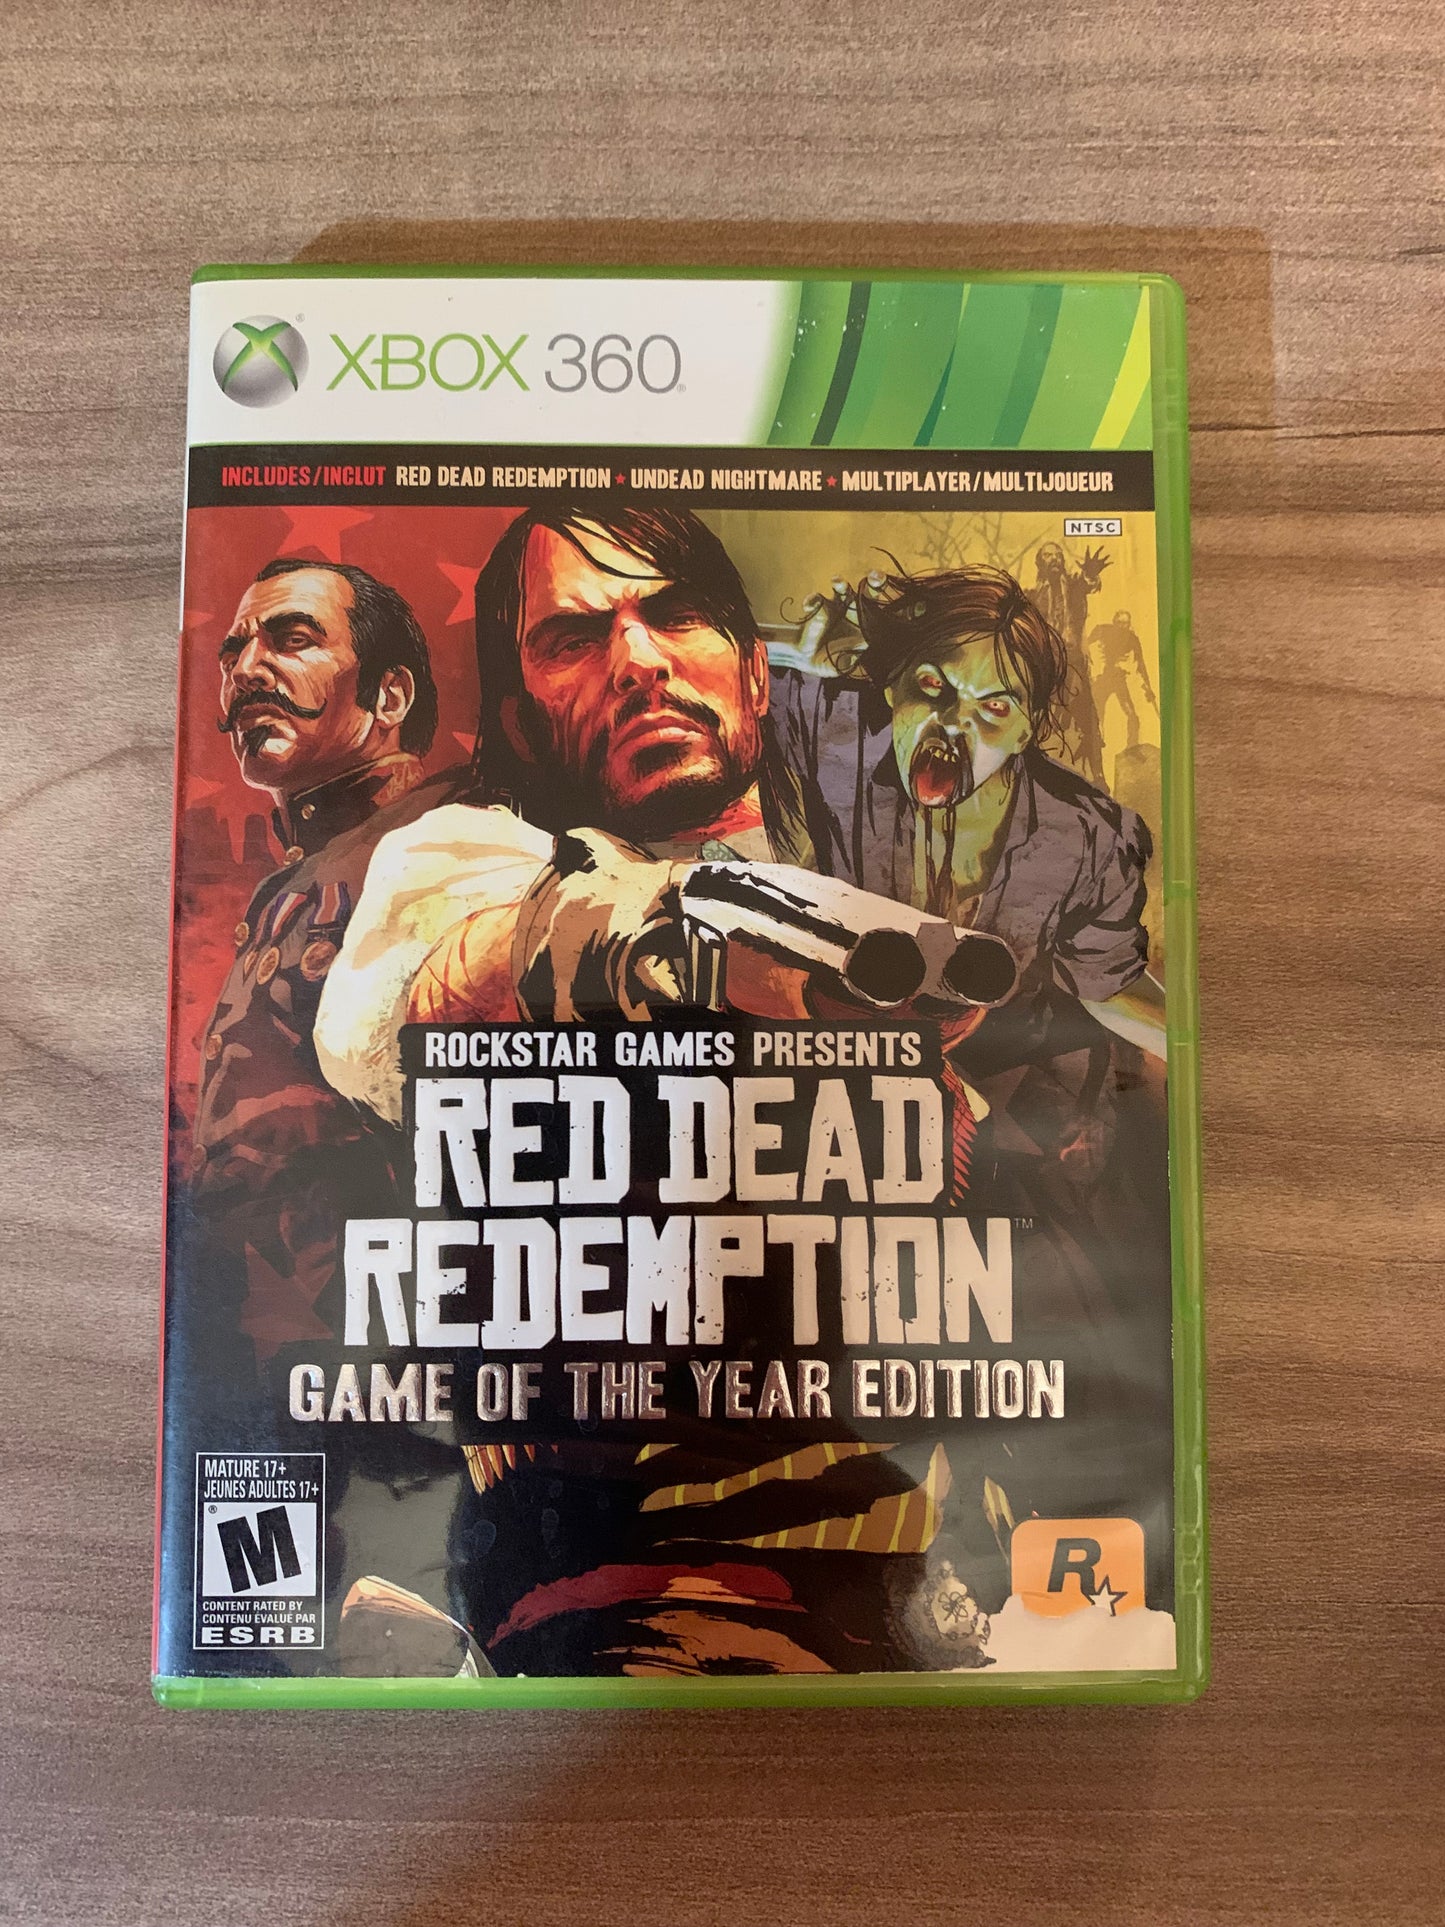 MiCROSOFT XBOX 360 | RED DEAD REDEMPTiON + UNDEAD NiGHTMARE | GAME OF THE YEAR EDiTiON